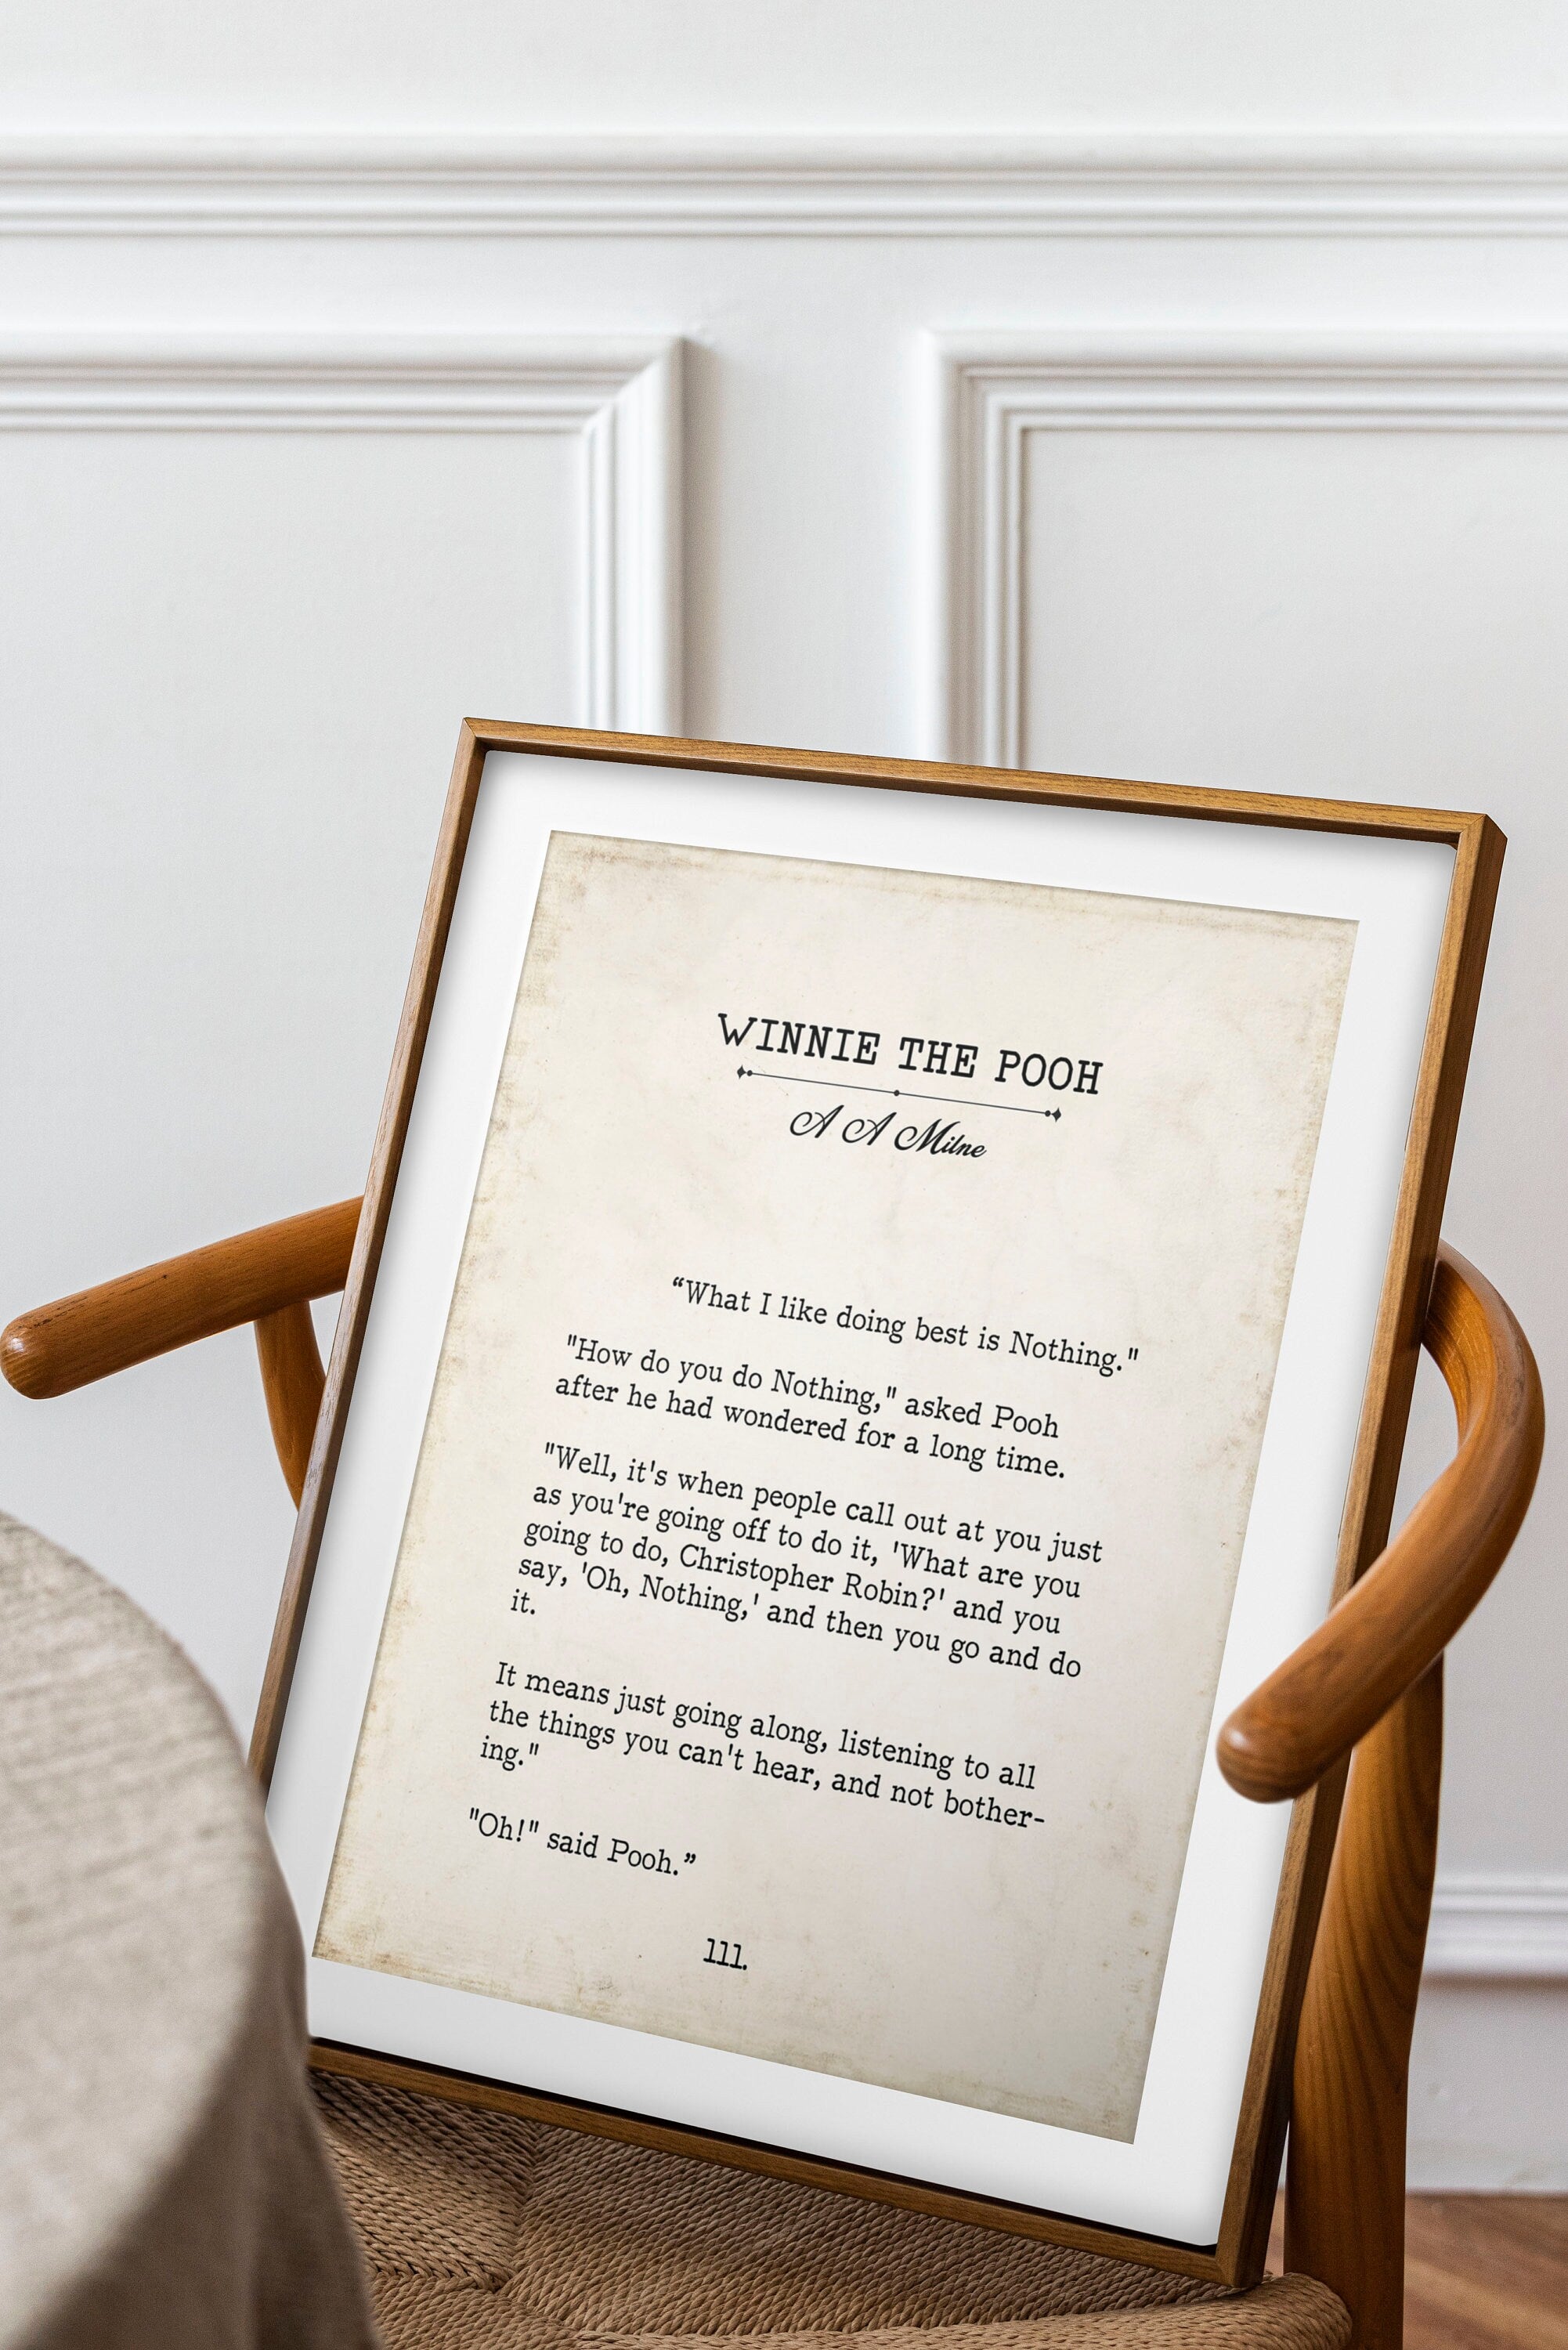 Winnie the Pooh Book Page Inspirational Wall Art, AA Milne Quote Vintage Style Print Wall Decor